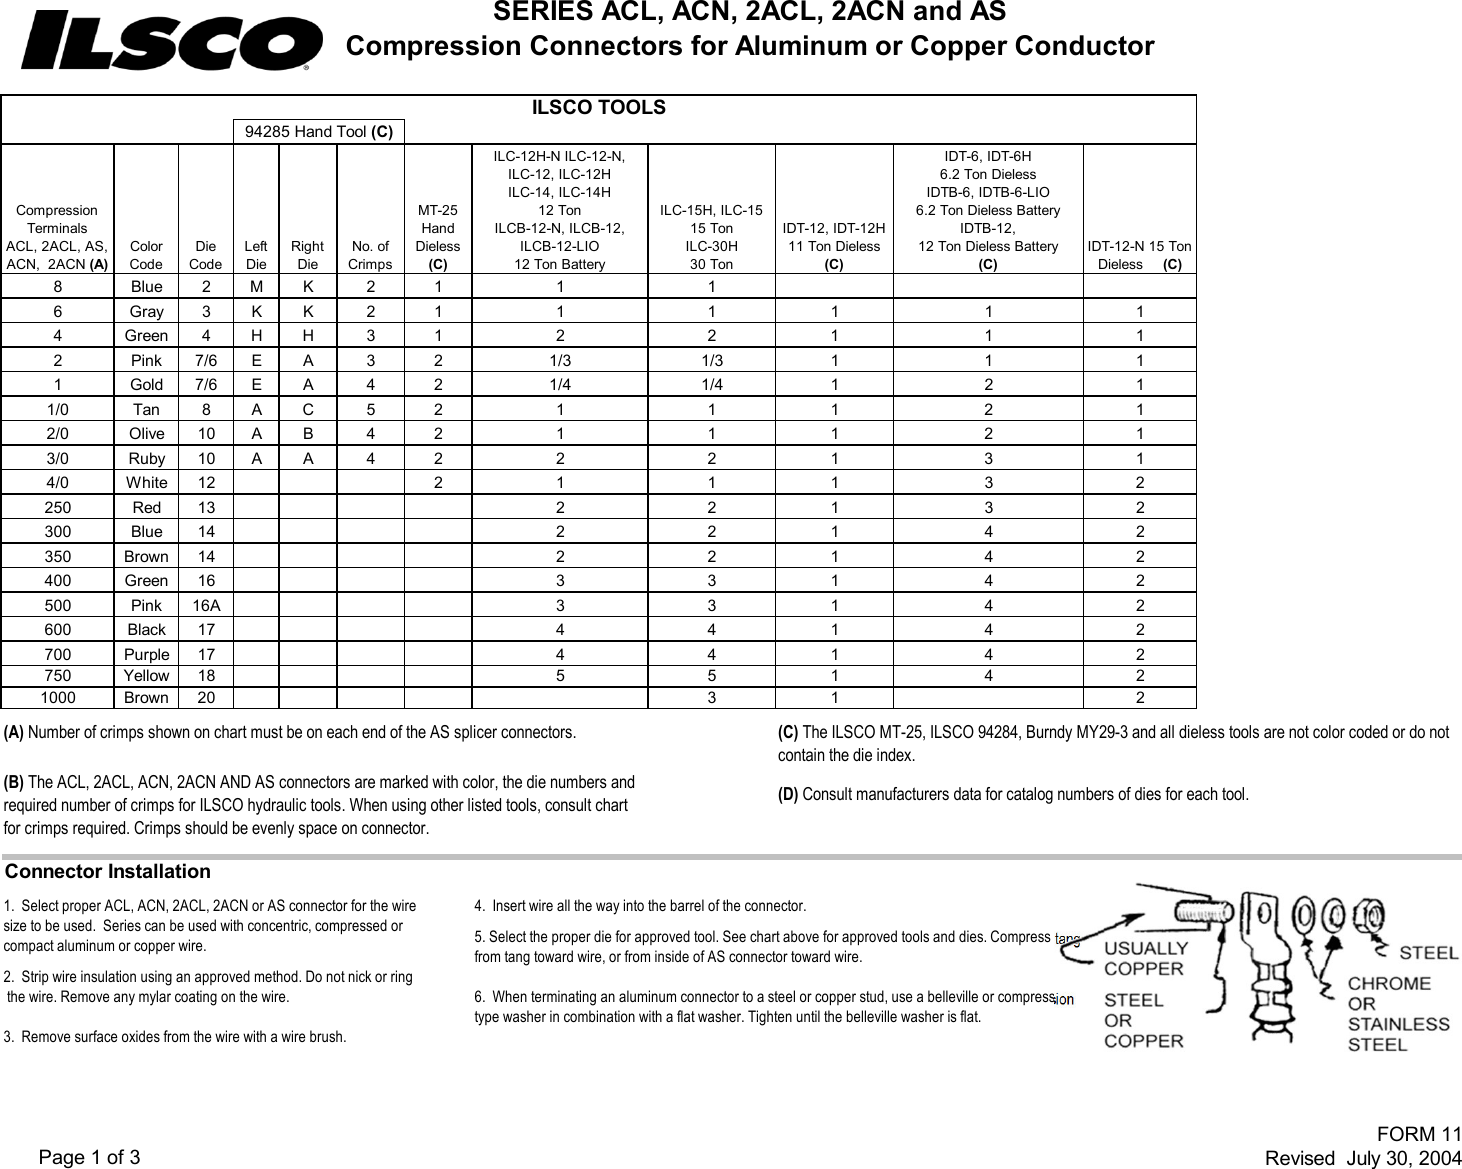 Page 1 of 3 - FORM 11-ACL-ACN-2ACL-2ACN-AS COMPRESSIONx  127652-Catalog